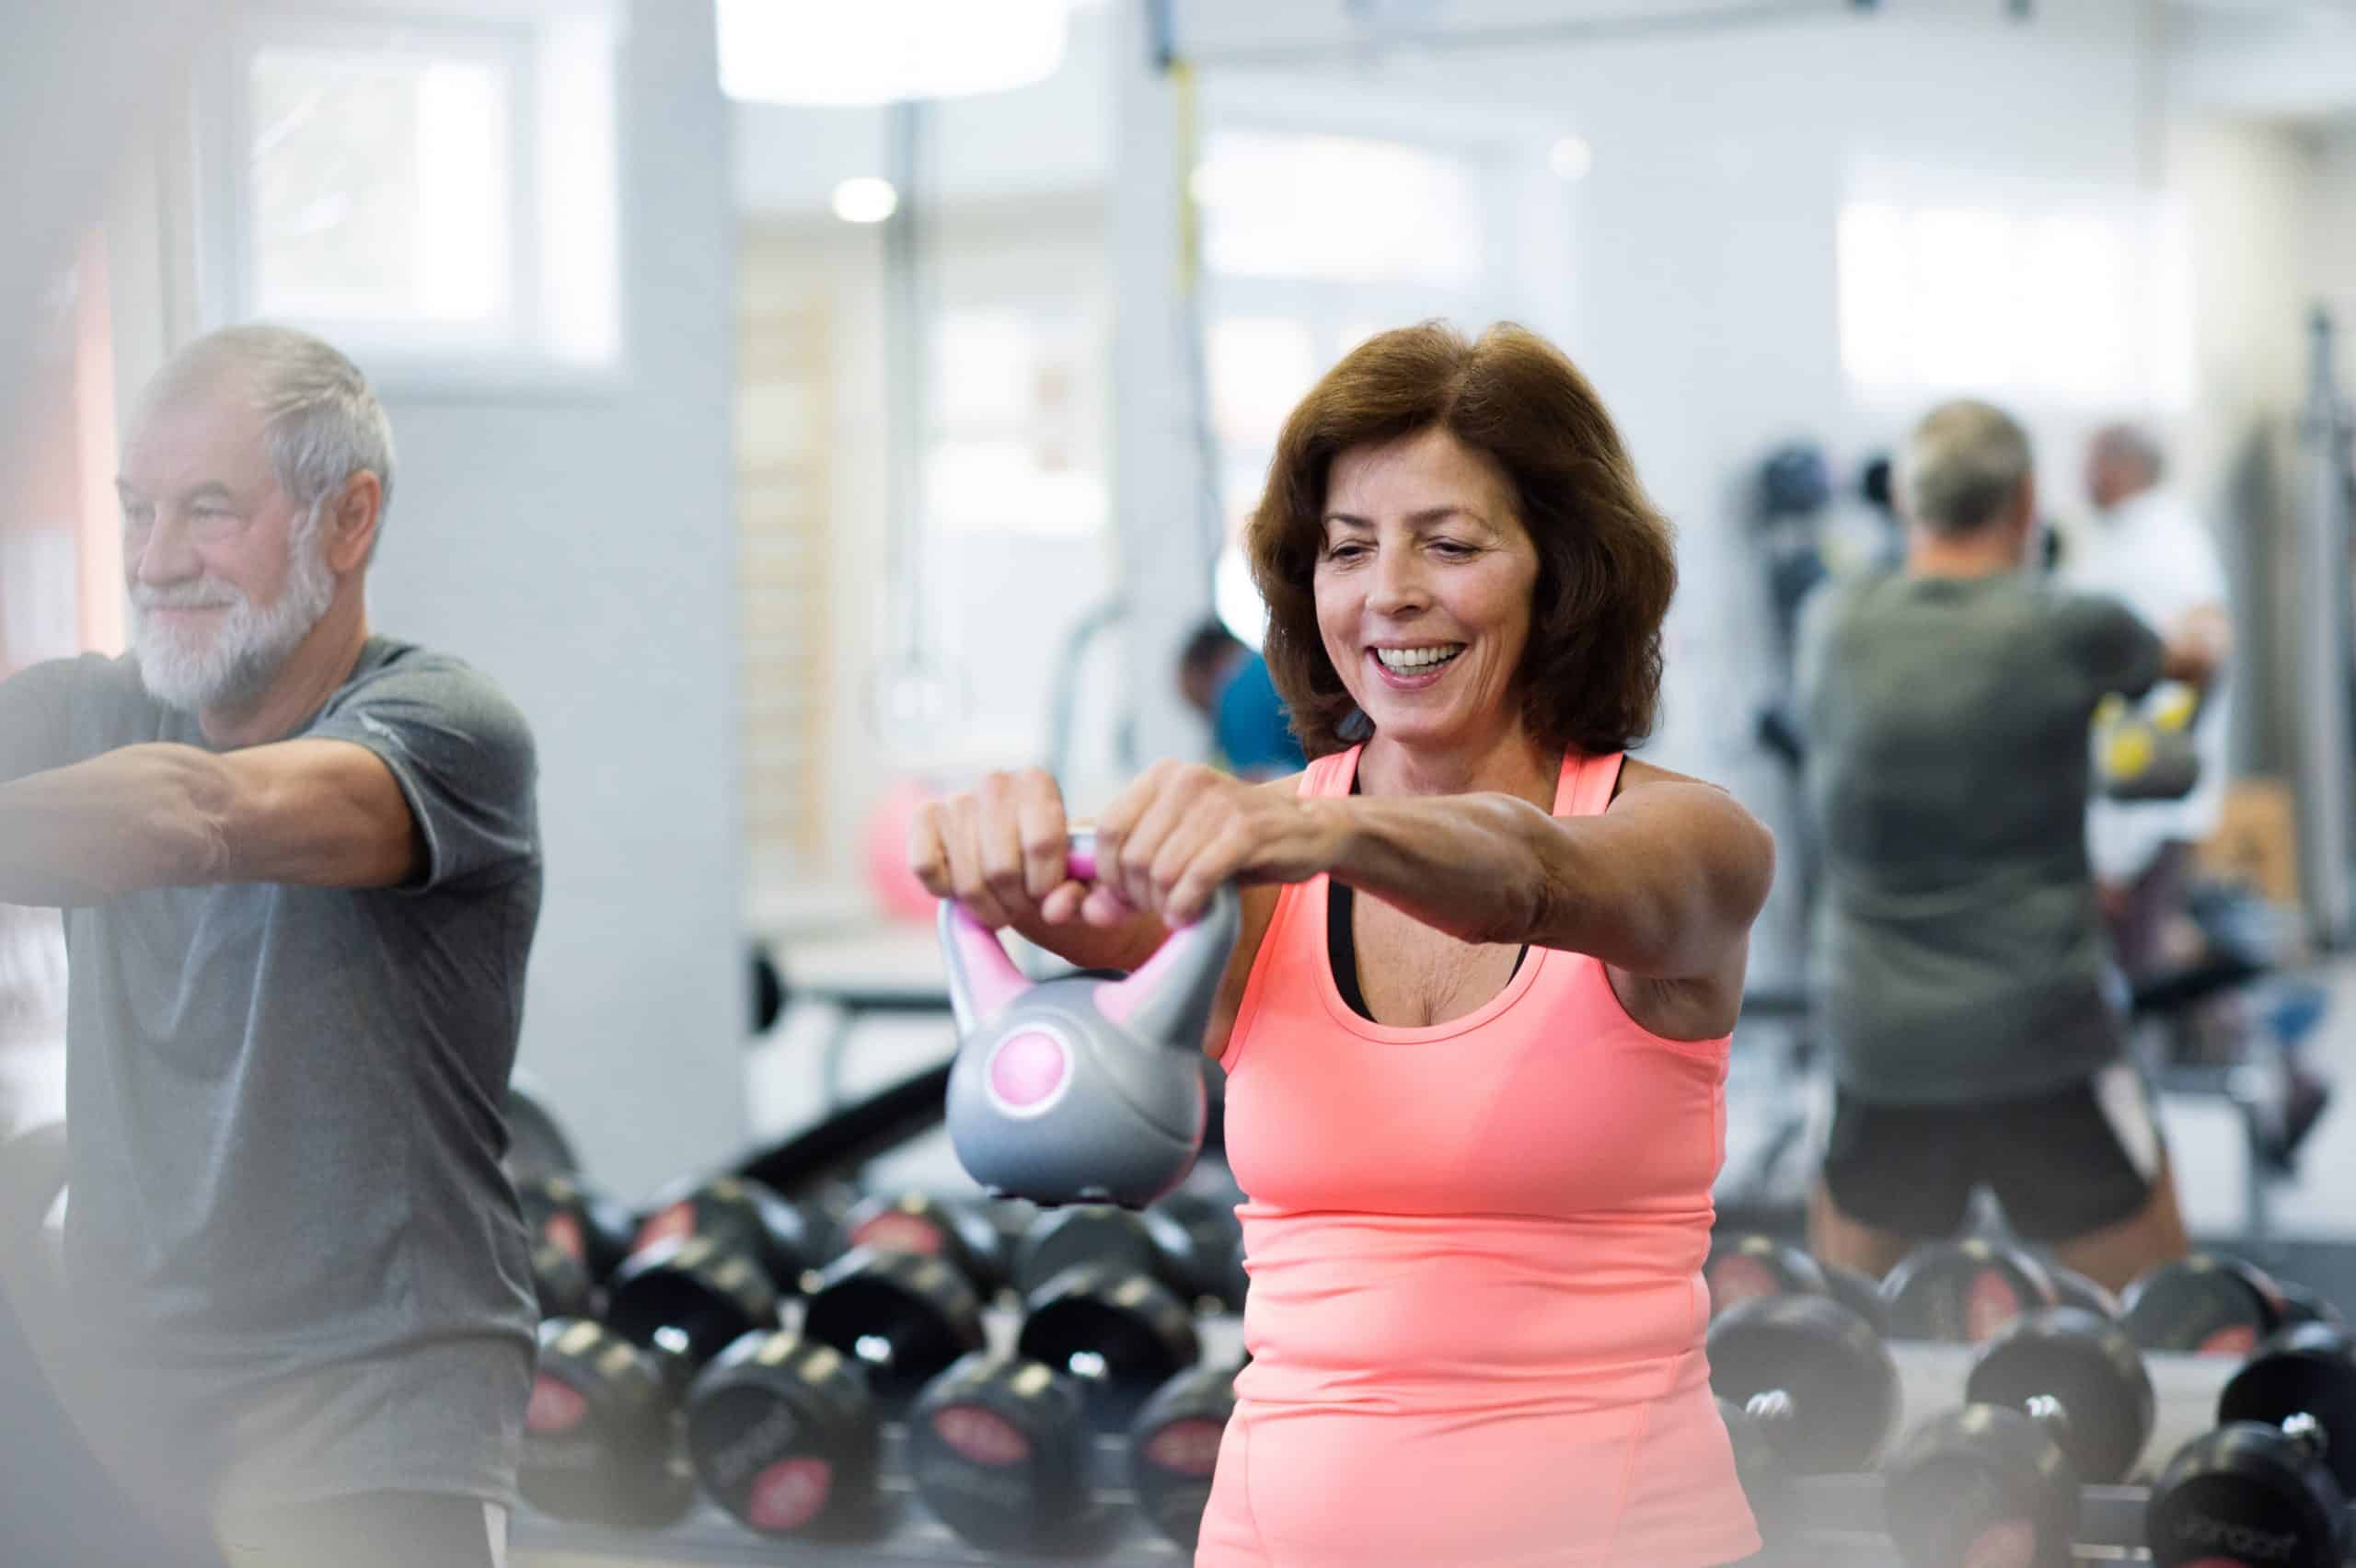 A recent study of prolonged resistance exercise training published in the International Journal of Sport Nutrition and Exercise Metabolism found increases in muscle mass, strength, and physical performance among older adults were no different between the 65 to 75 and 85+ age groups. Older adults who lifted weights three times a week, no matter the age, showed significant muscle growth.